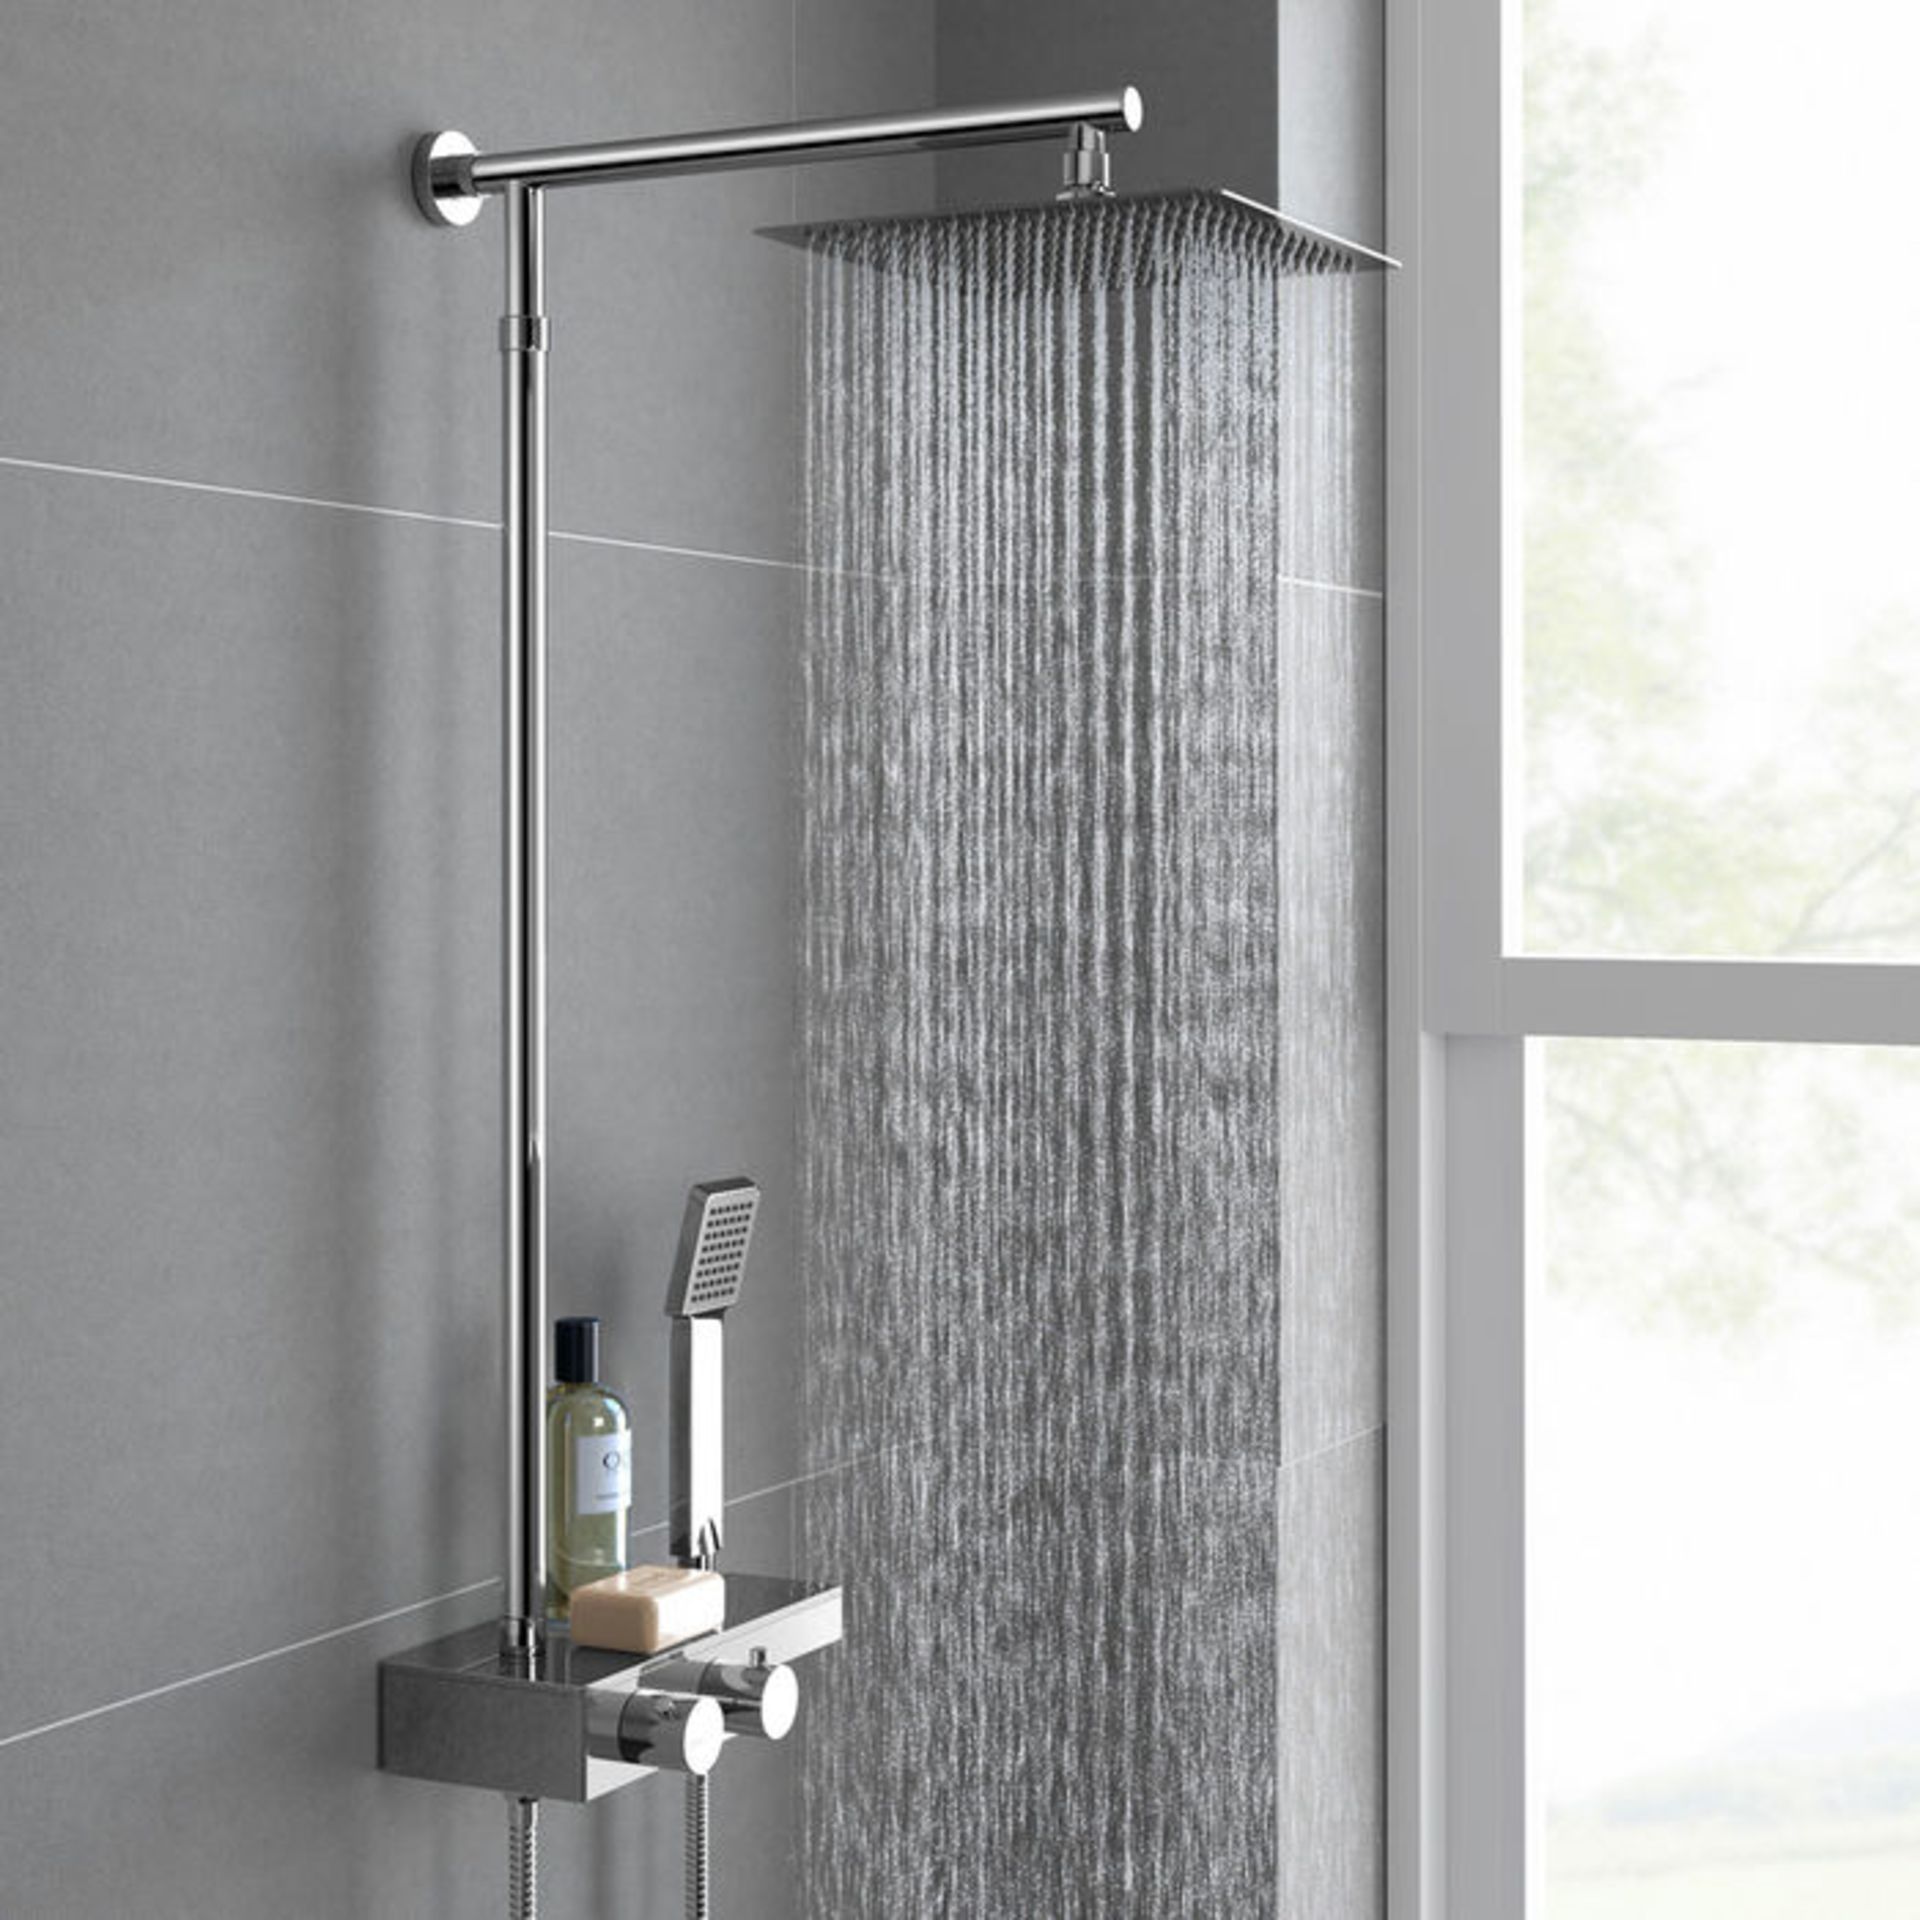 (TA53) Square Exposed Thermostatic Shower Shelf, Kit & Large Head. RRP £349.99. Style meets function